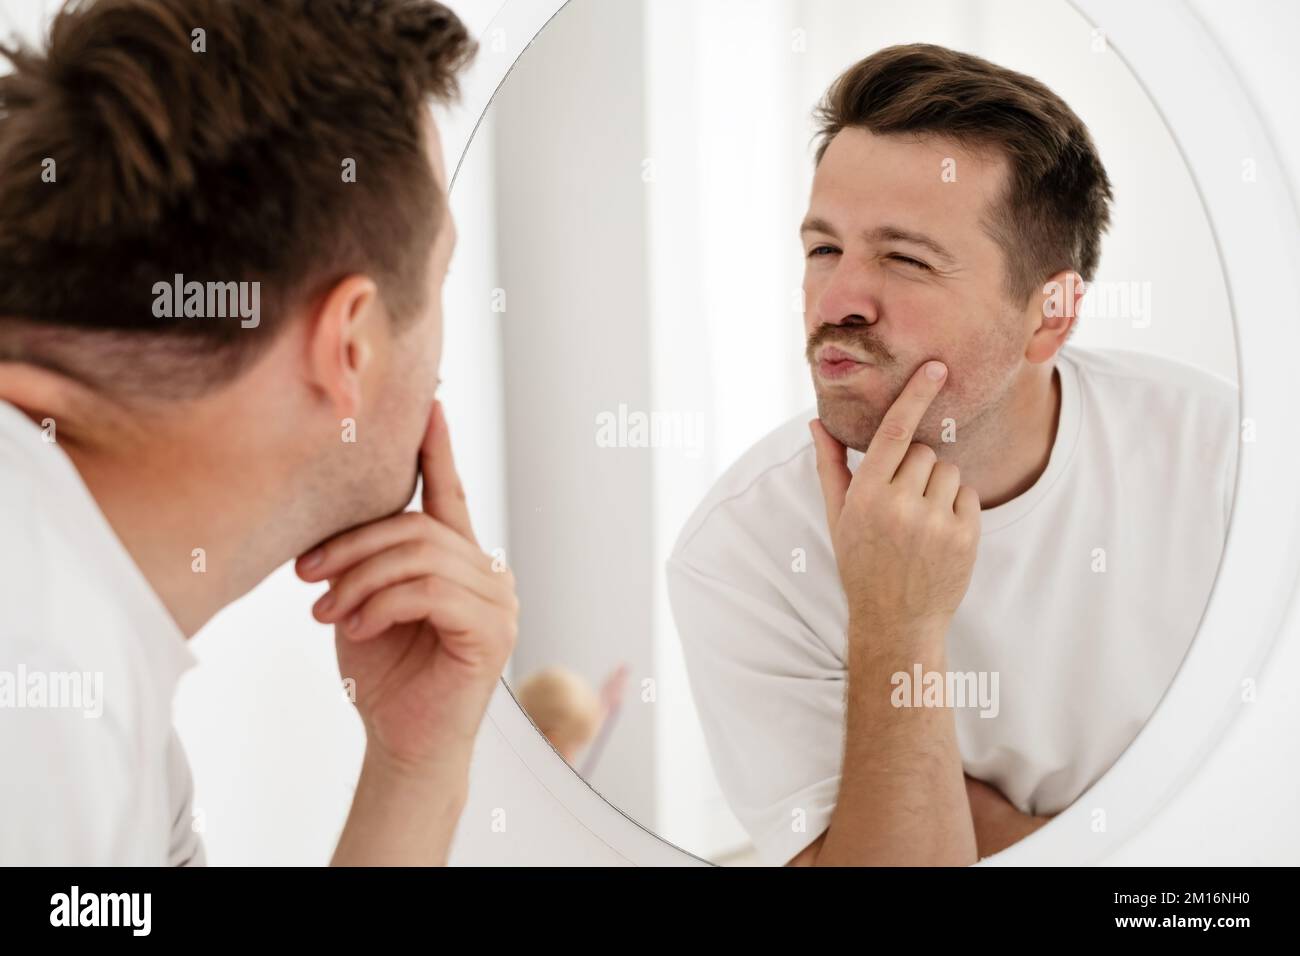 young man trying to cheer himself up before a first date Stock Photo